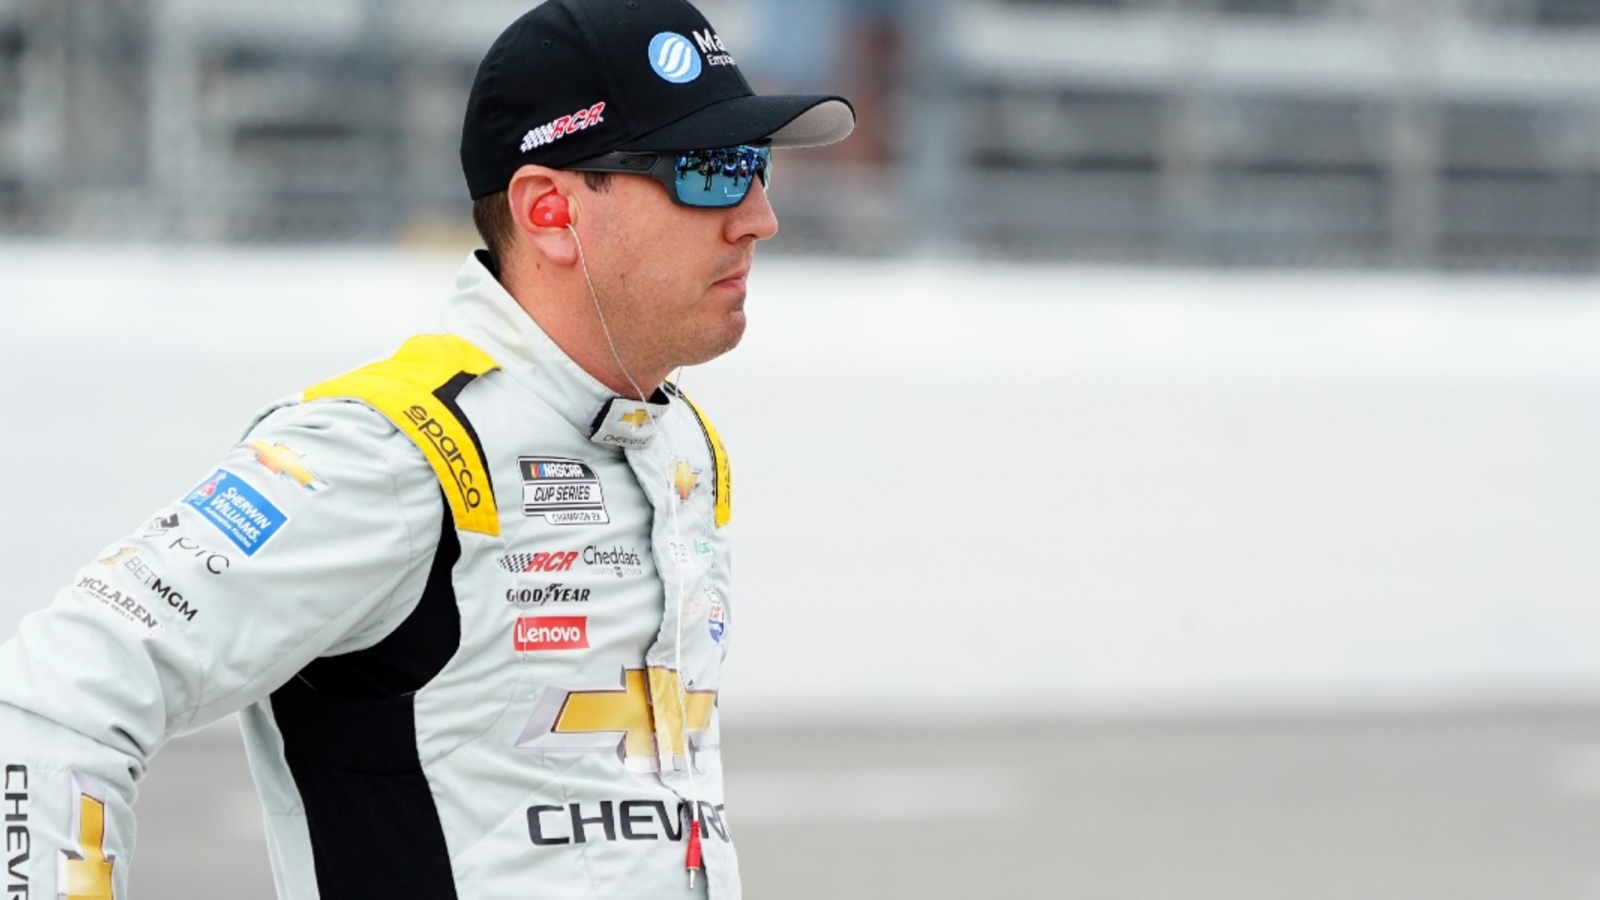 Denny Hamlin believes Kyle Busch was about to apologize before Ricky Stenhouse Jr. threw a punch